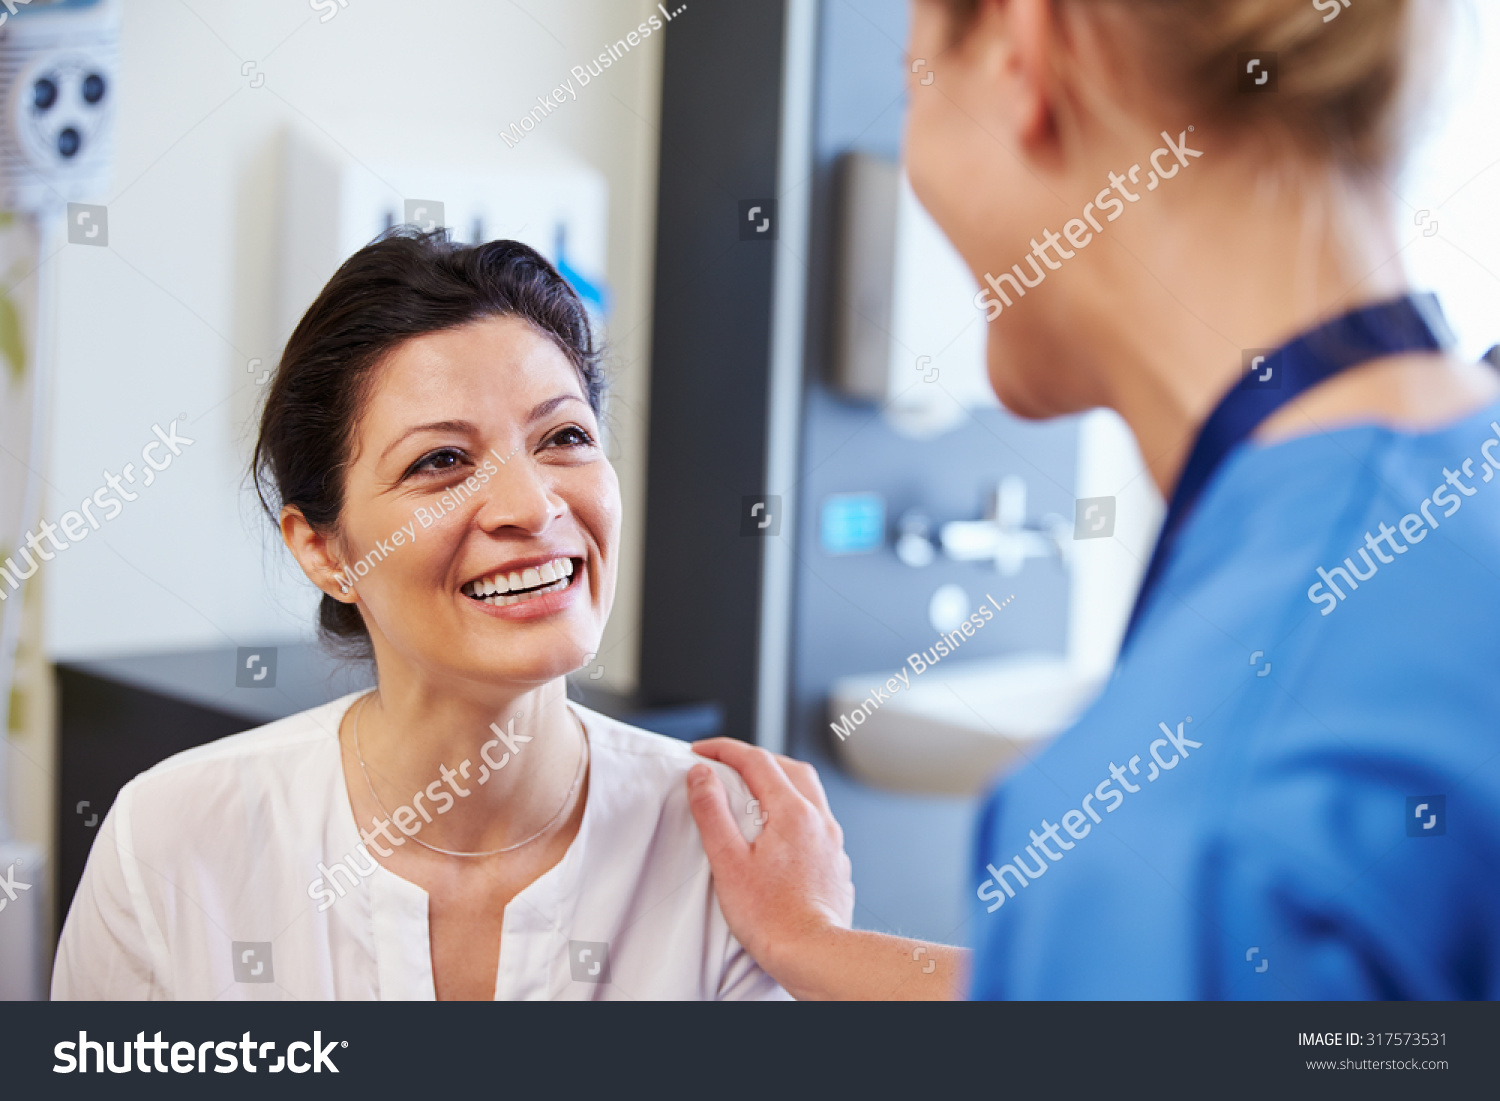 stock-photo-female-patient-being-reassured-by-doctor-in-hospital-room-31757.jpg